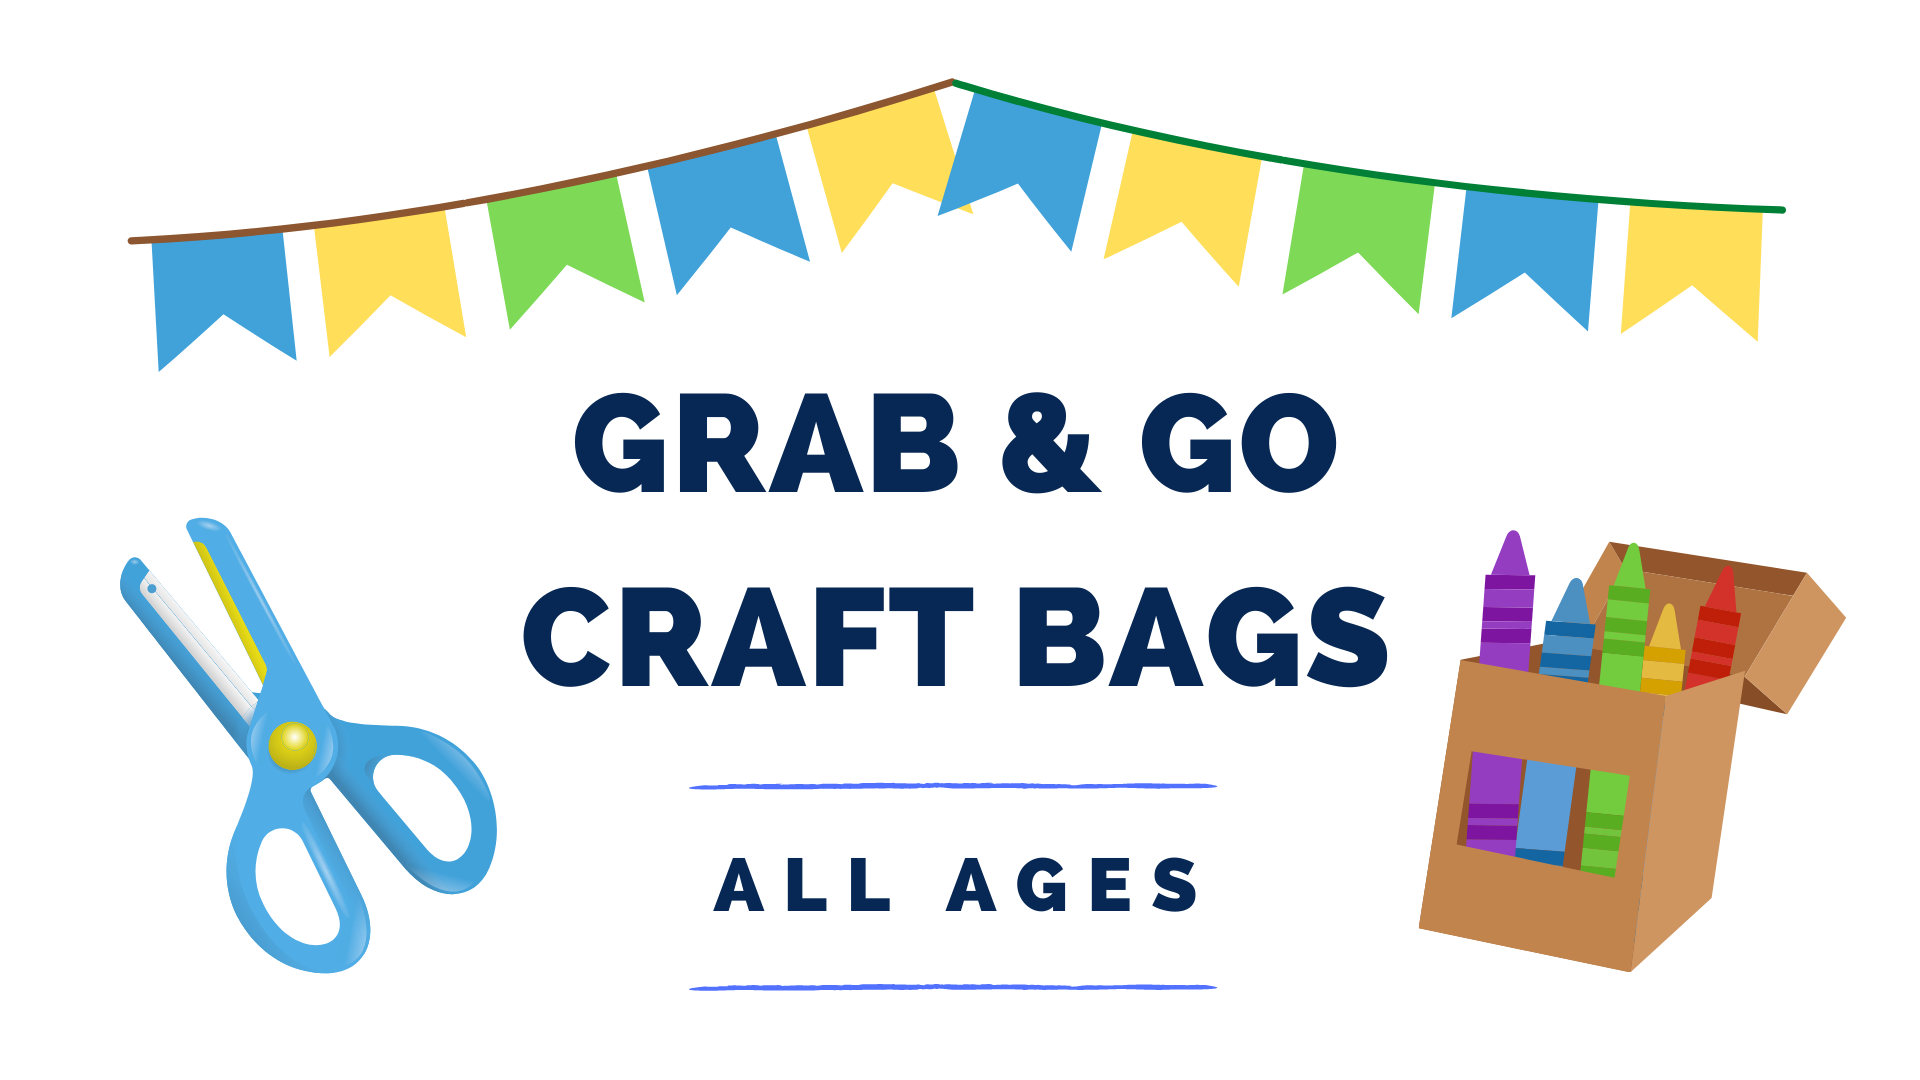 Grab & Go Craft Bags All Ages